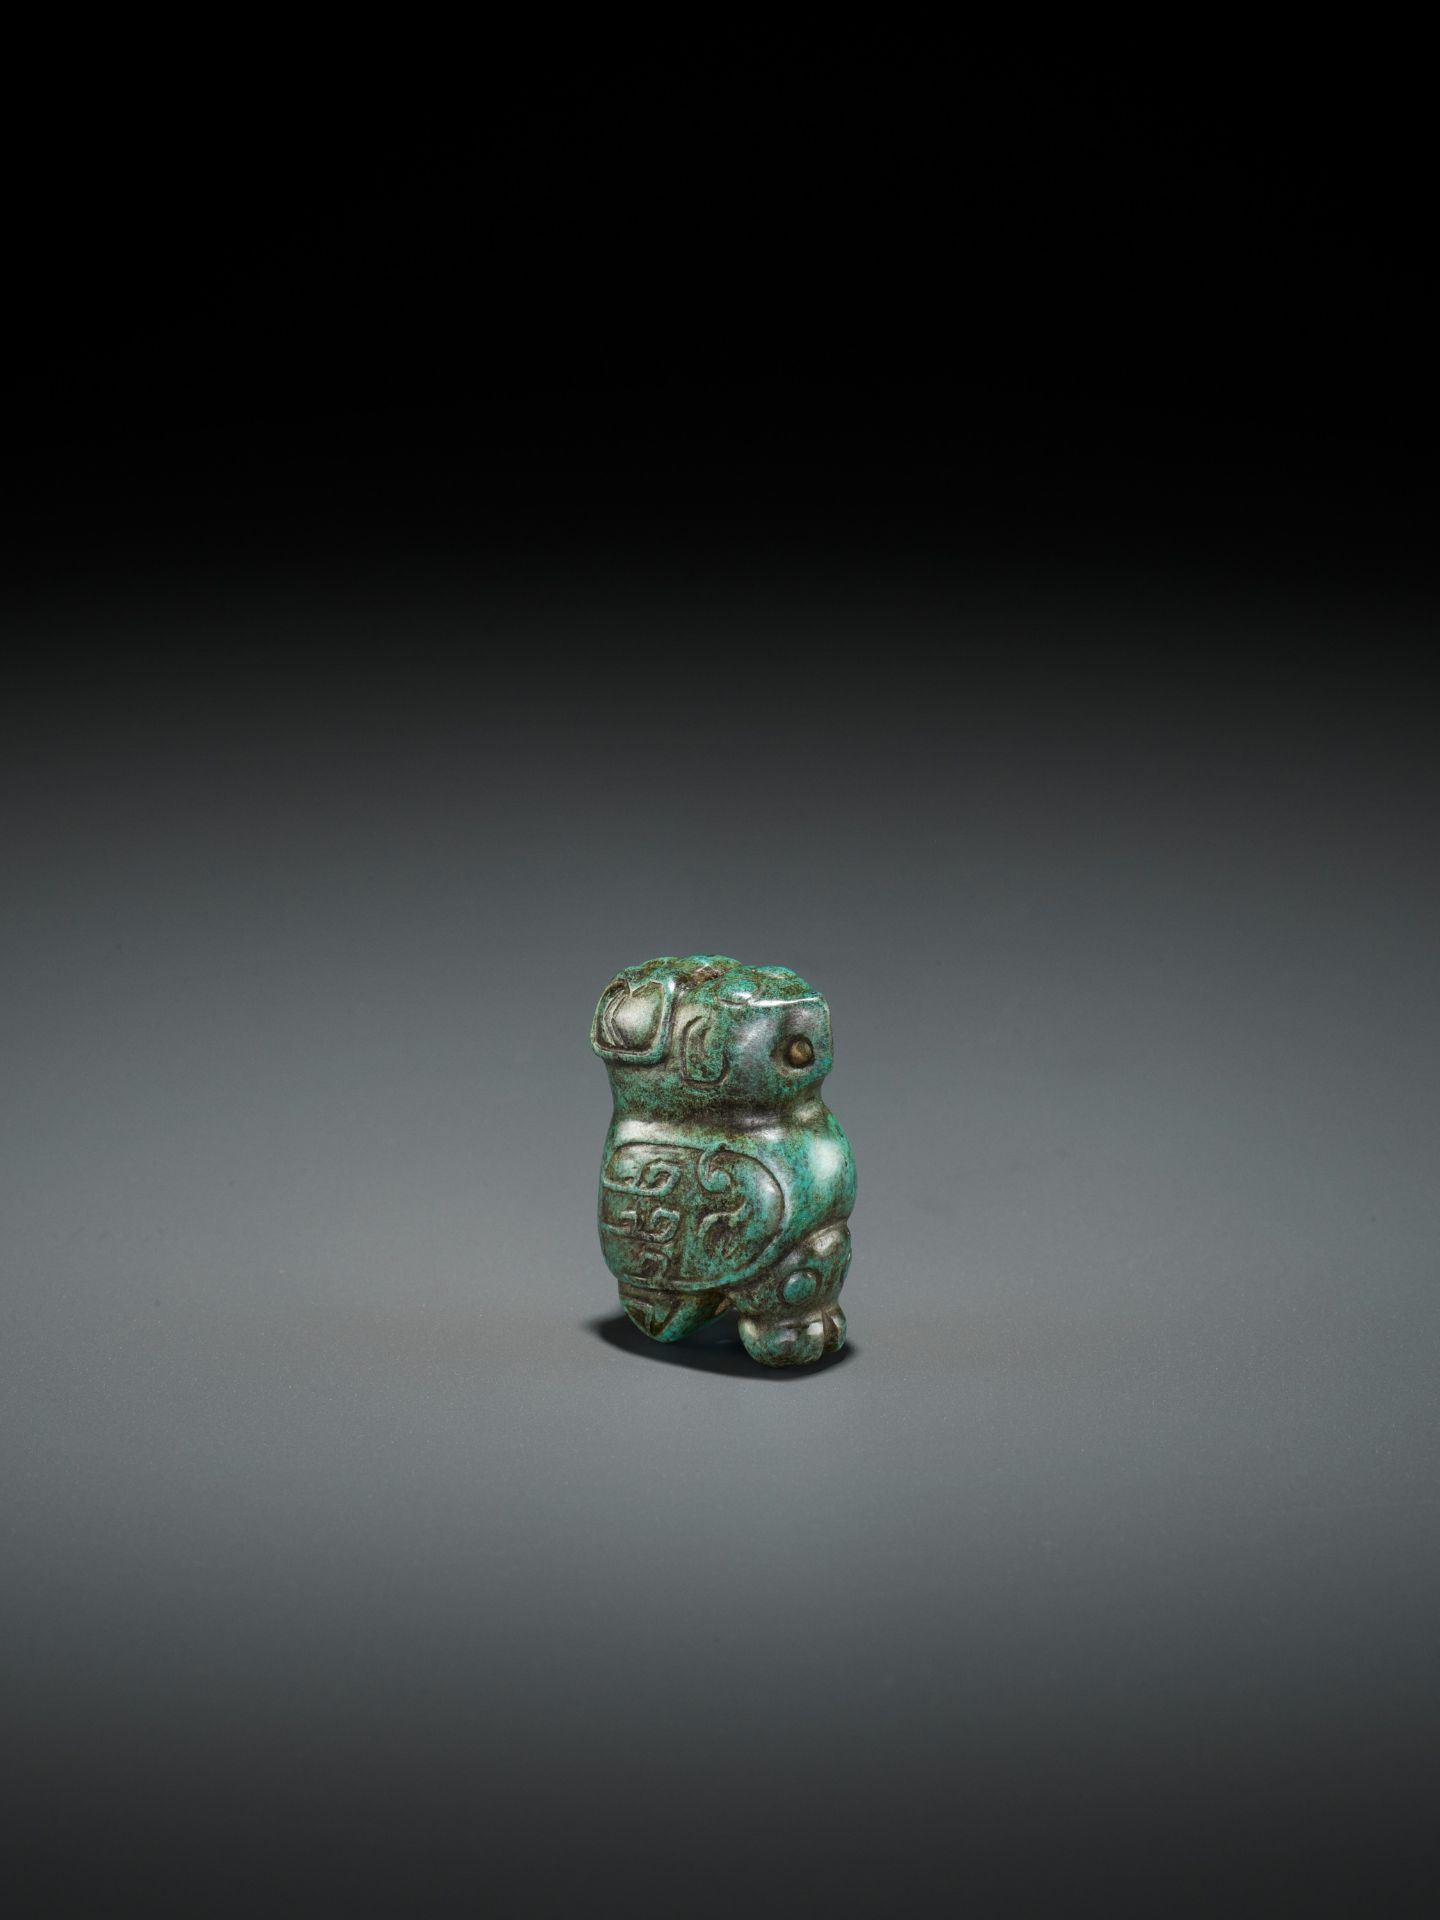 A TURQUOISE MATRIX PENDANT DEPICTING AN OWL, LATE SHANG DYNASTY - Image 8 of 13